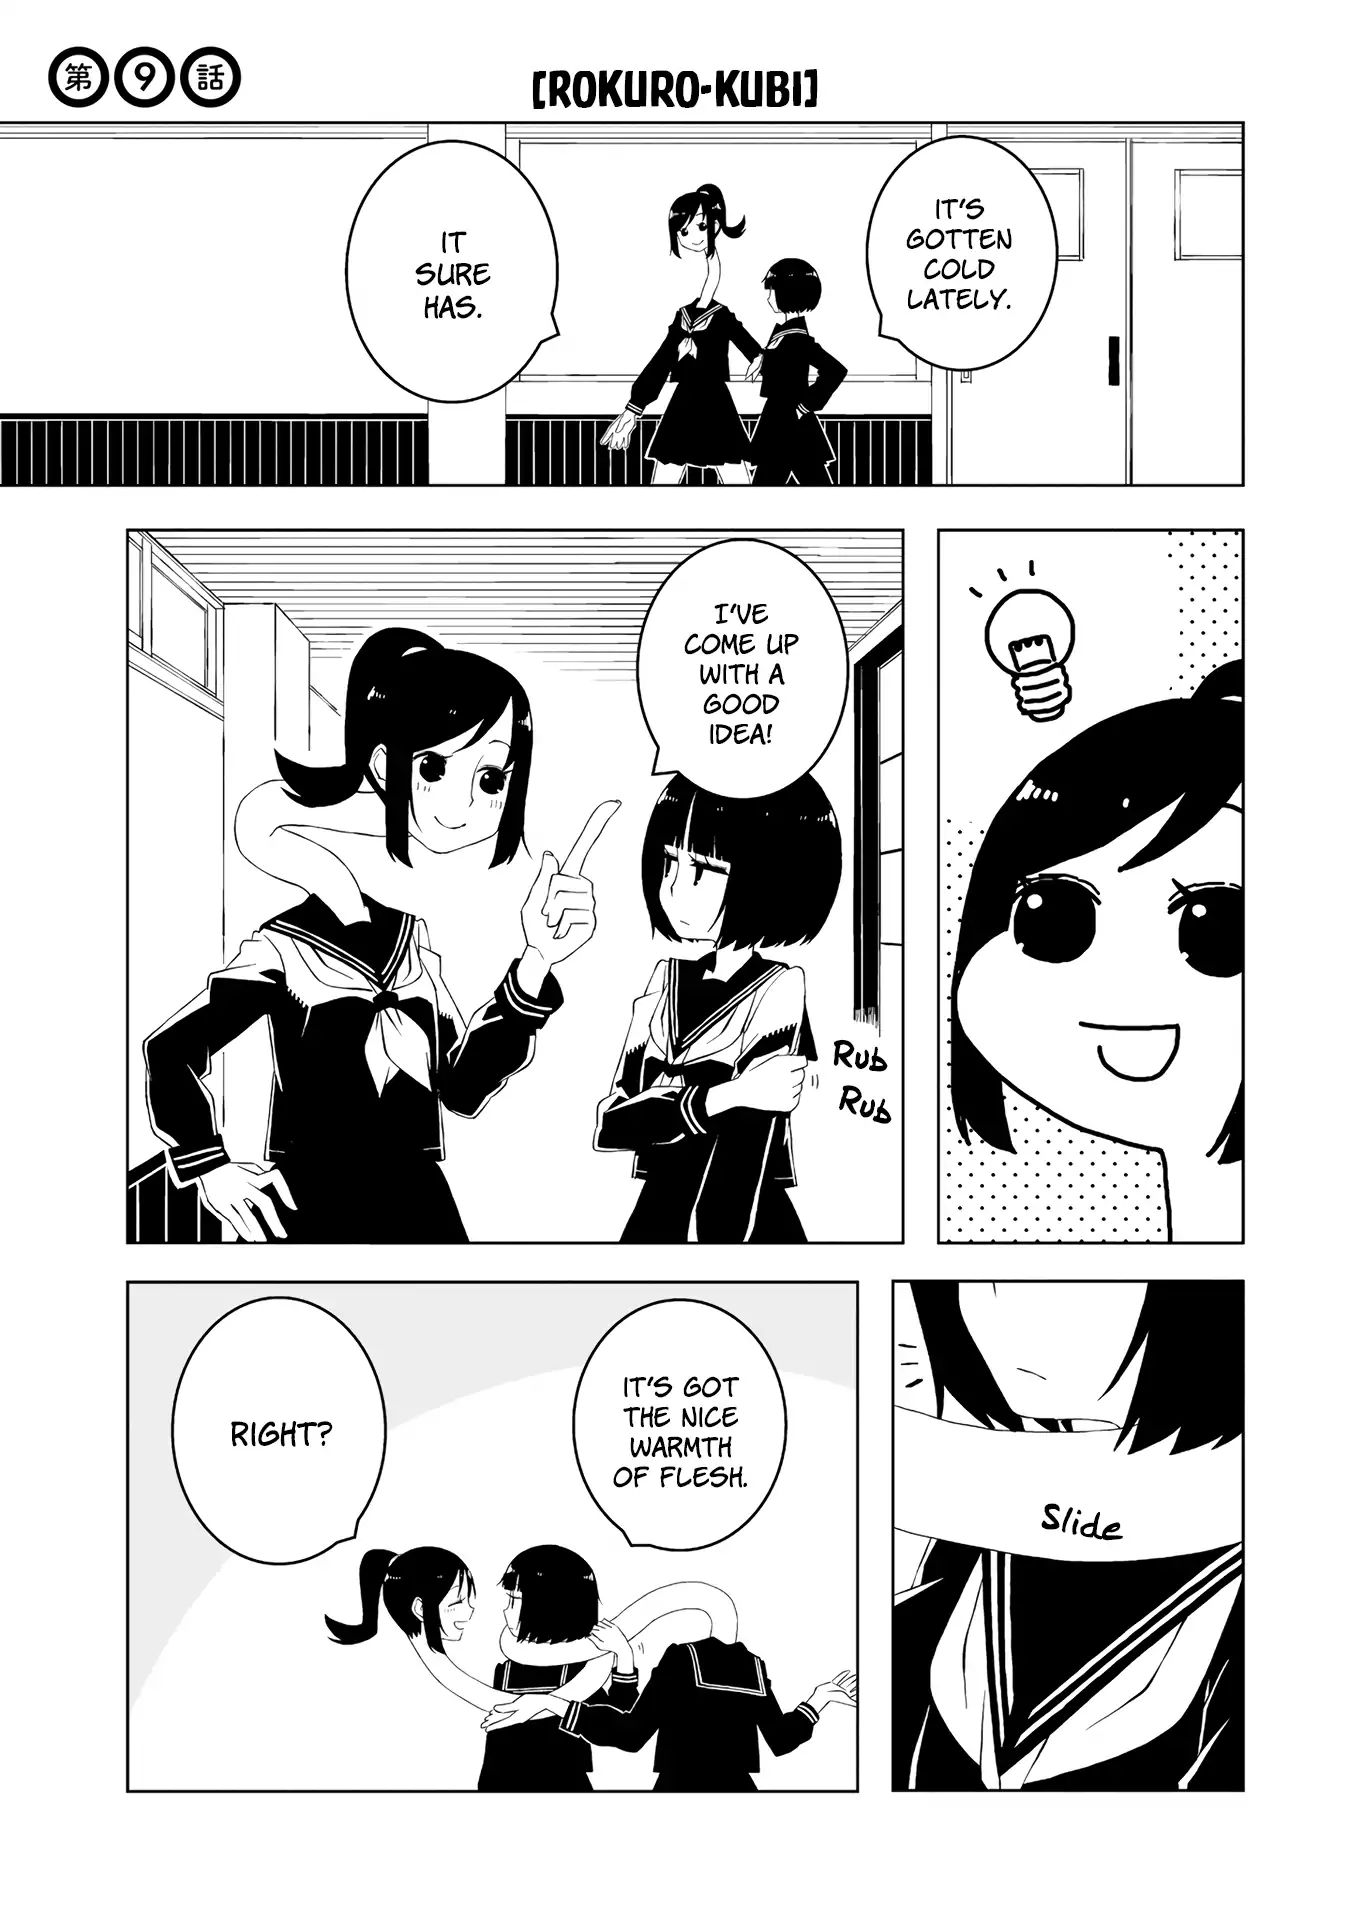 A Story About Doing Xx To Girls From Different Species Vol.1 Chapter 9